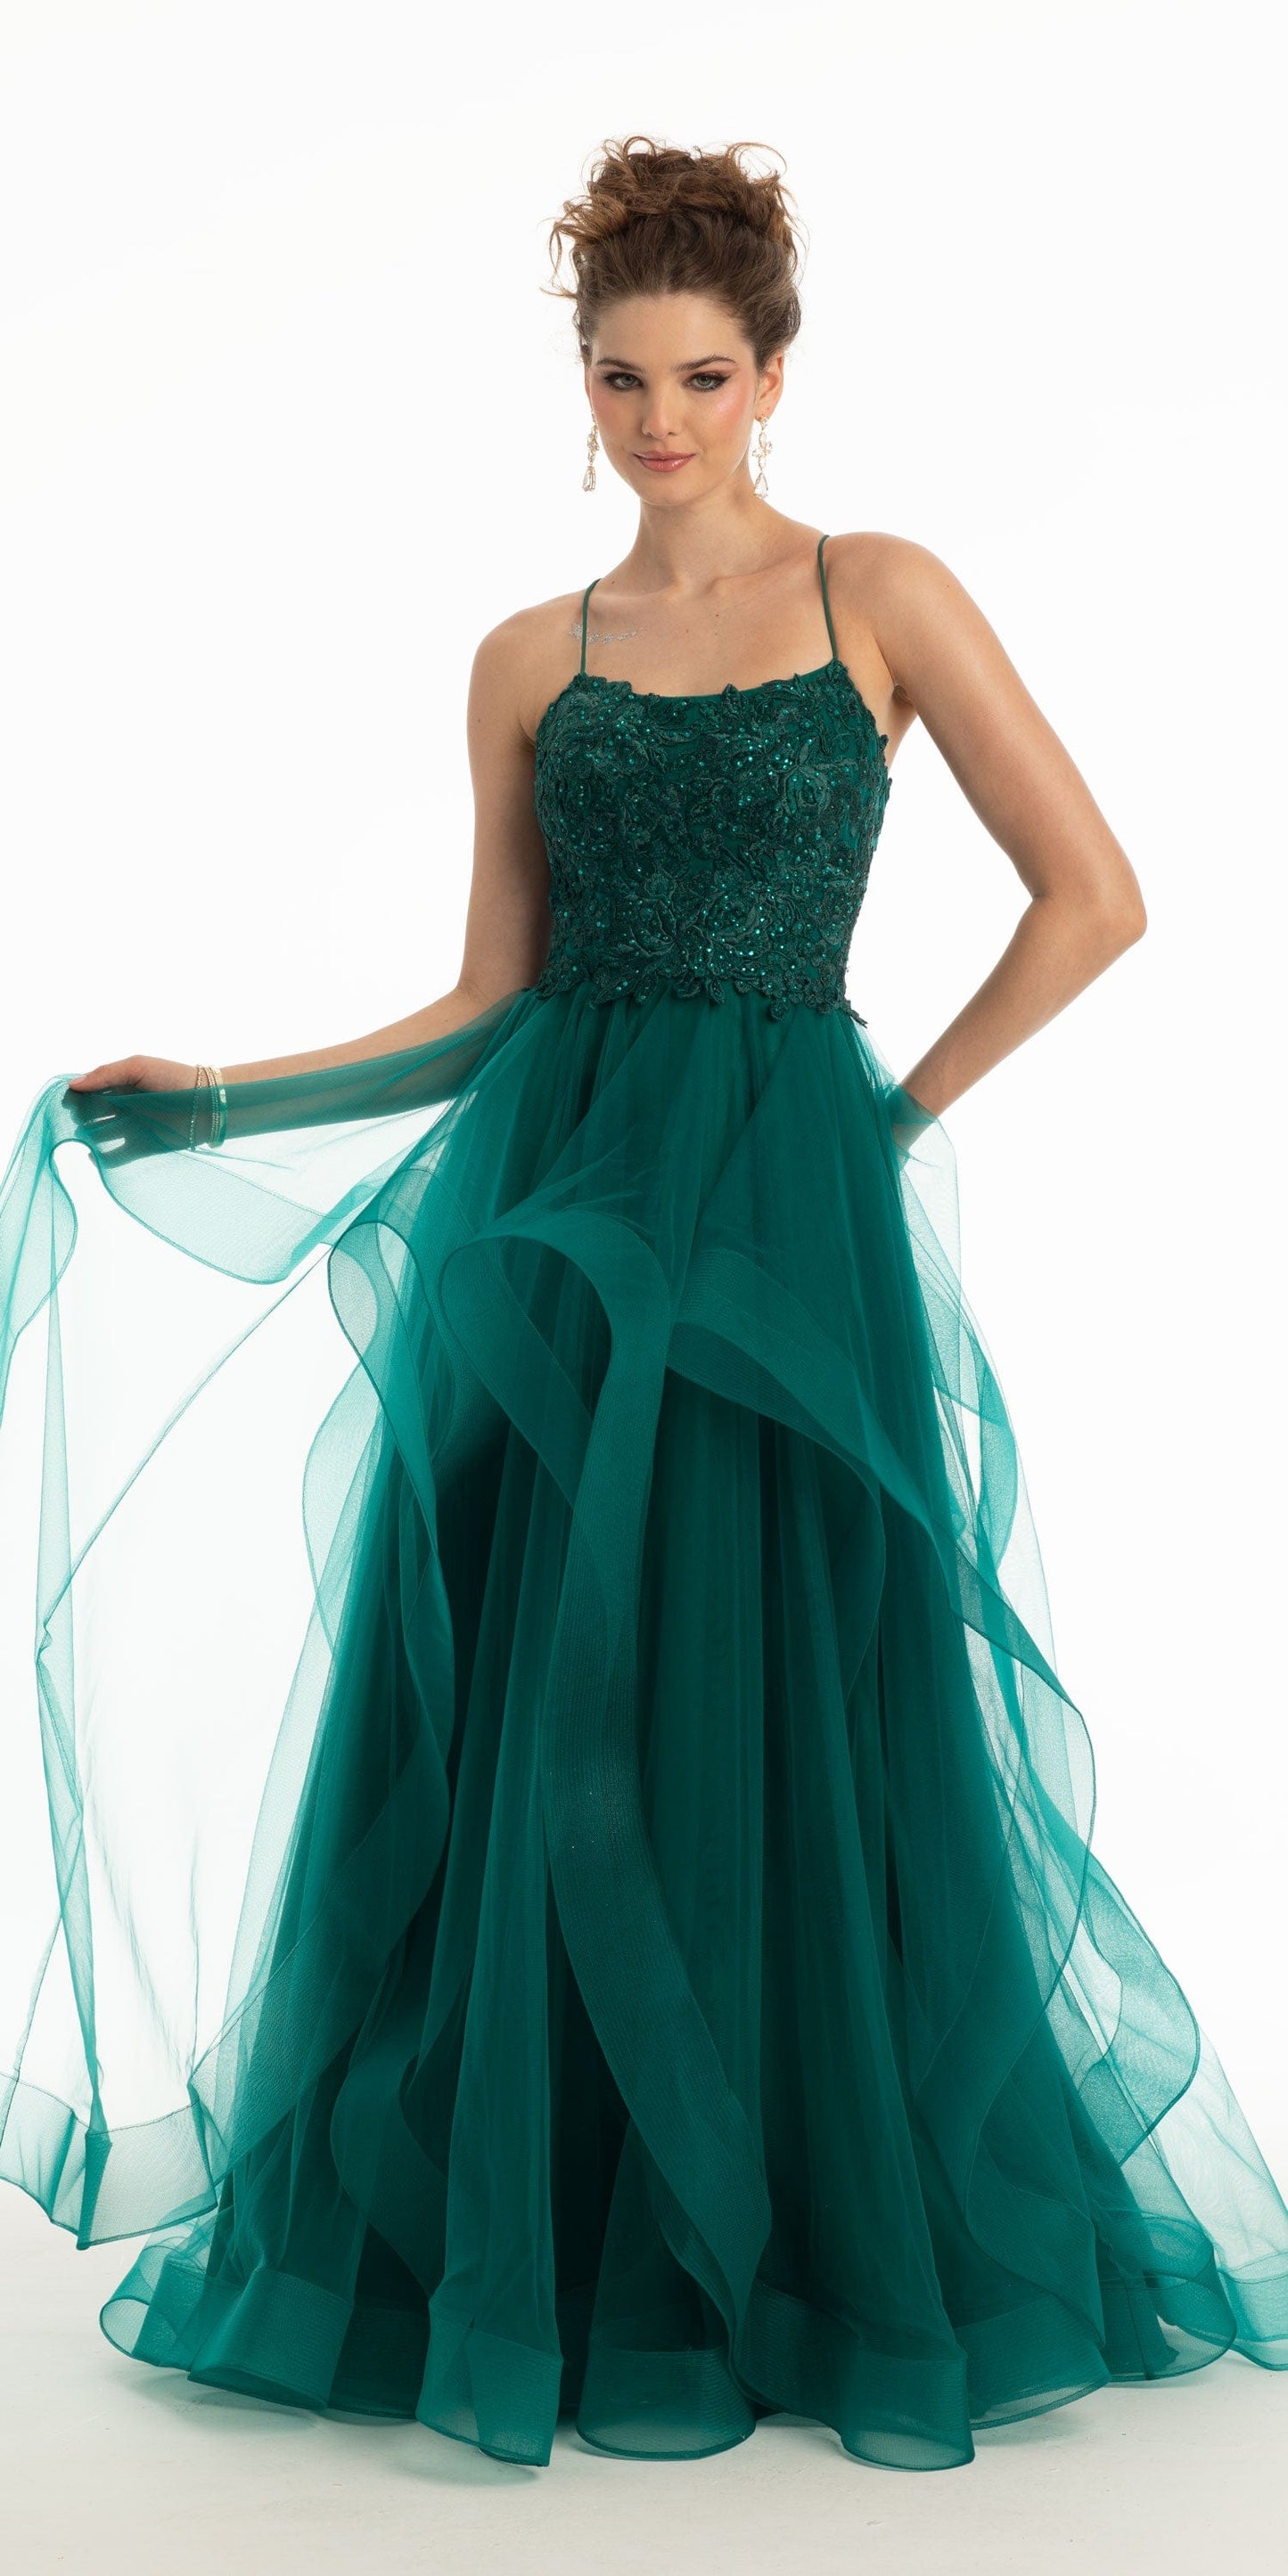 Camille La Vie Embroidered Bodice Lace Up Back Mesh Tiered Ballgown with Horse Hair Hem missy / 0 / emerald